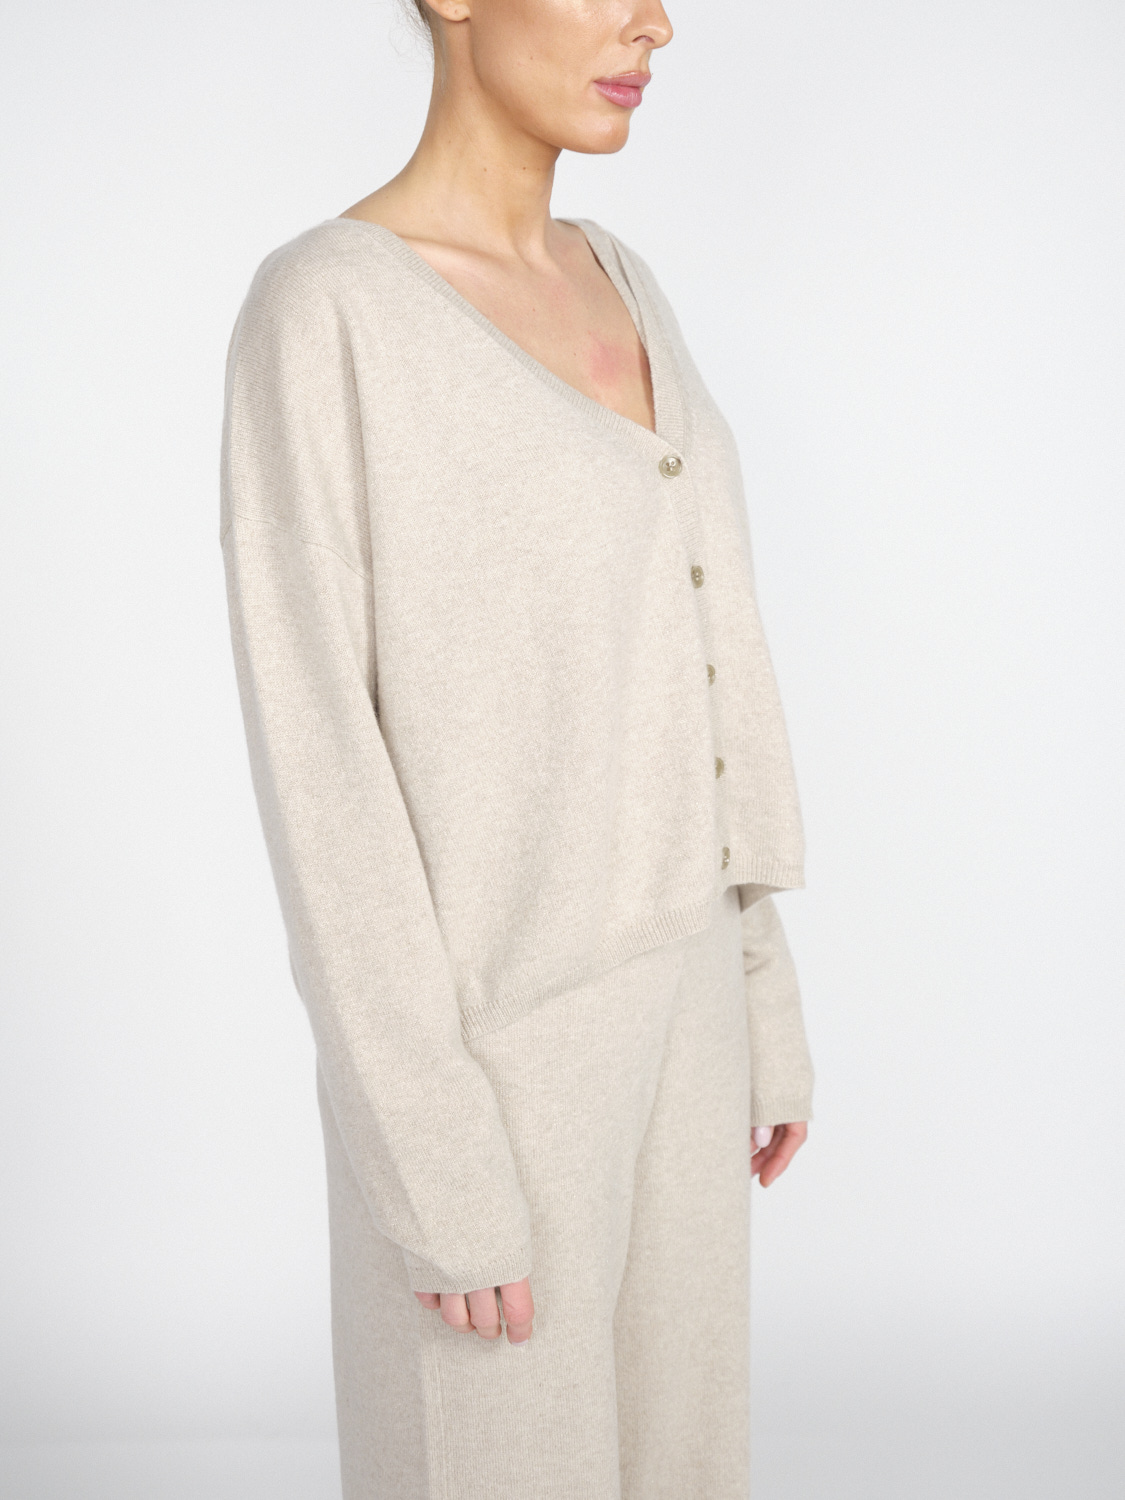 Lisa Yang Abby - Cashmere cardigan with glitter effects  beige One Size